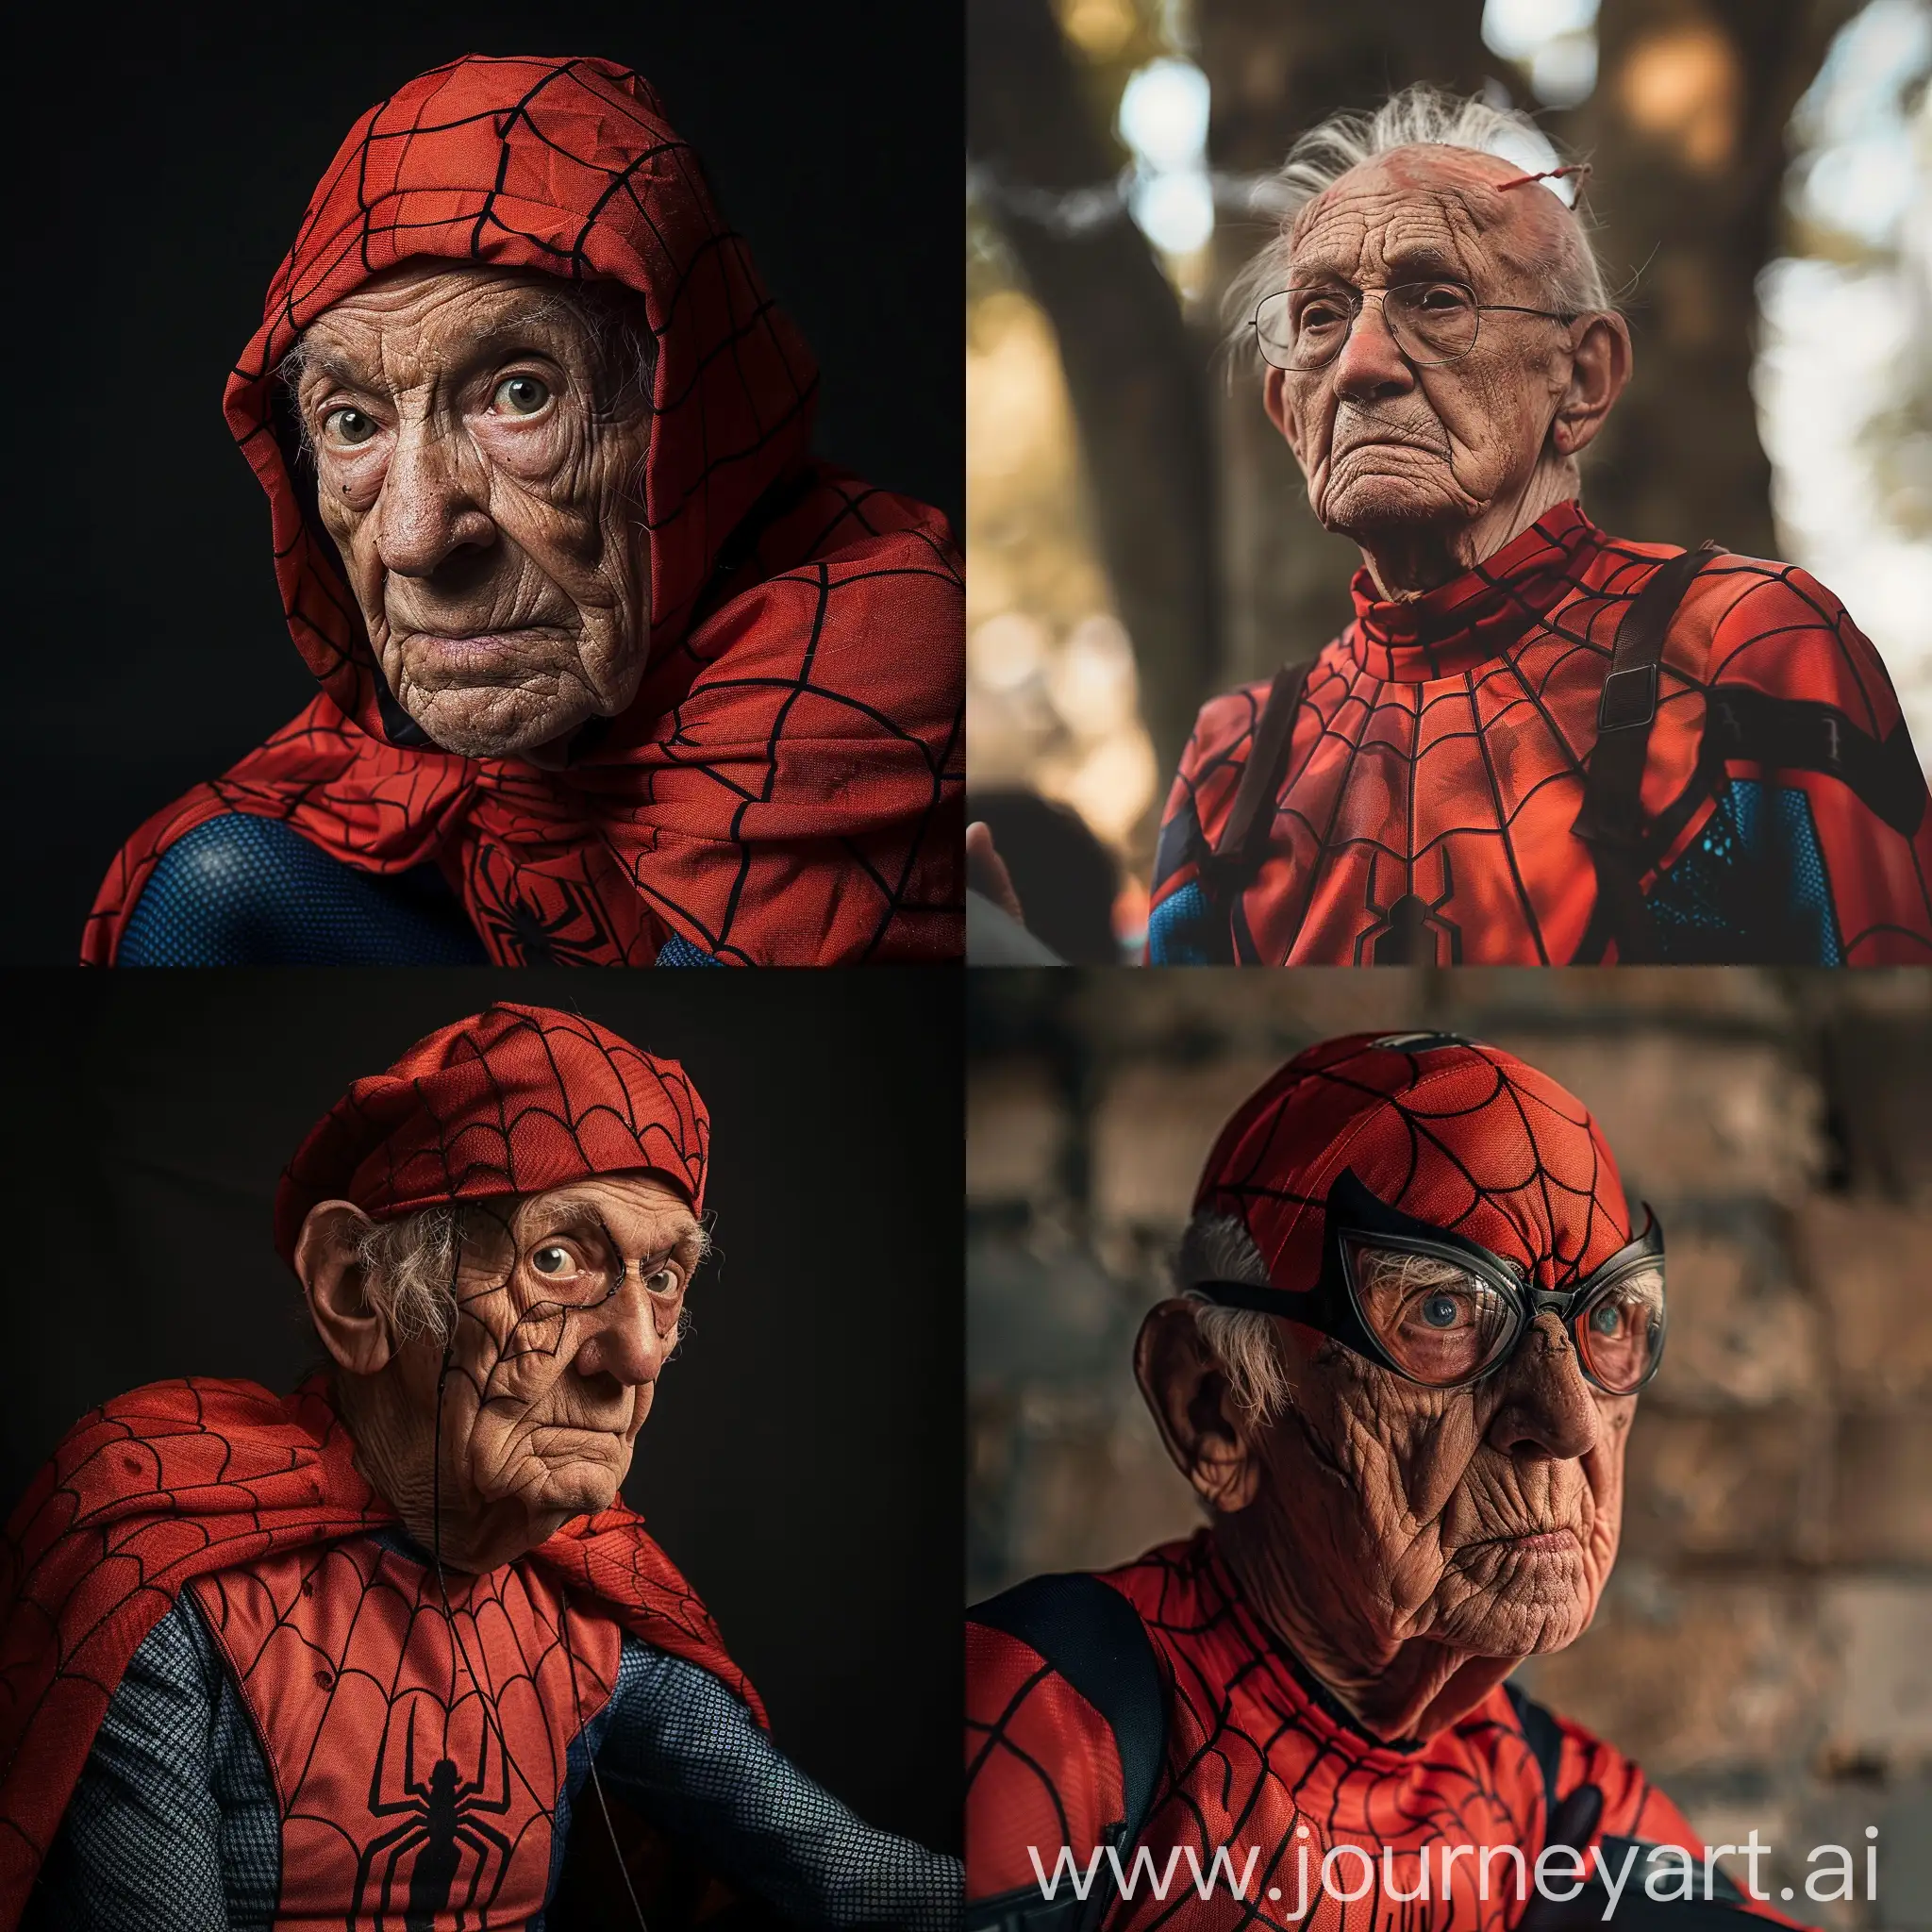 Elderly-Man-Cosplaying-as-Spiderman-at-Comic-Convention